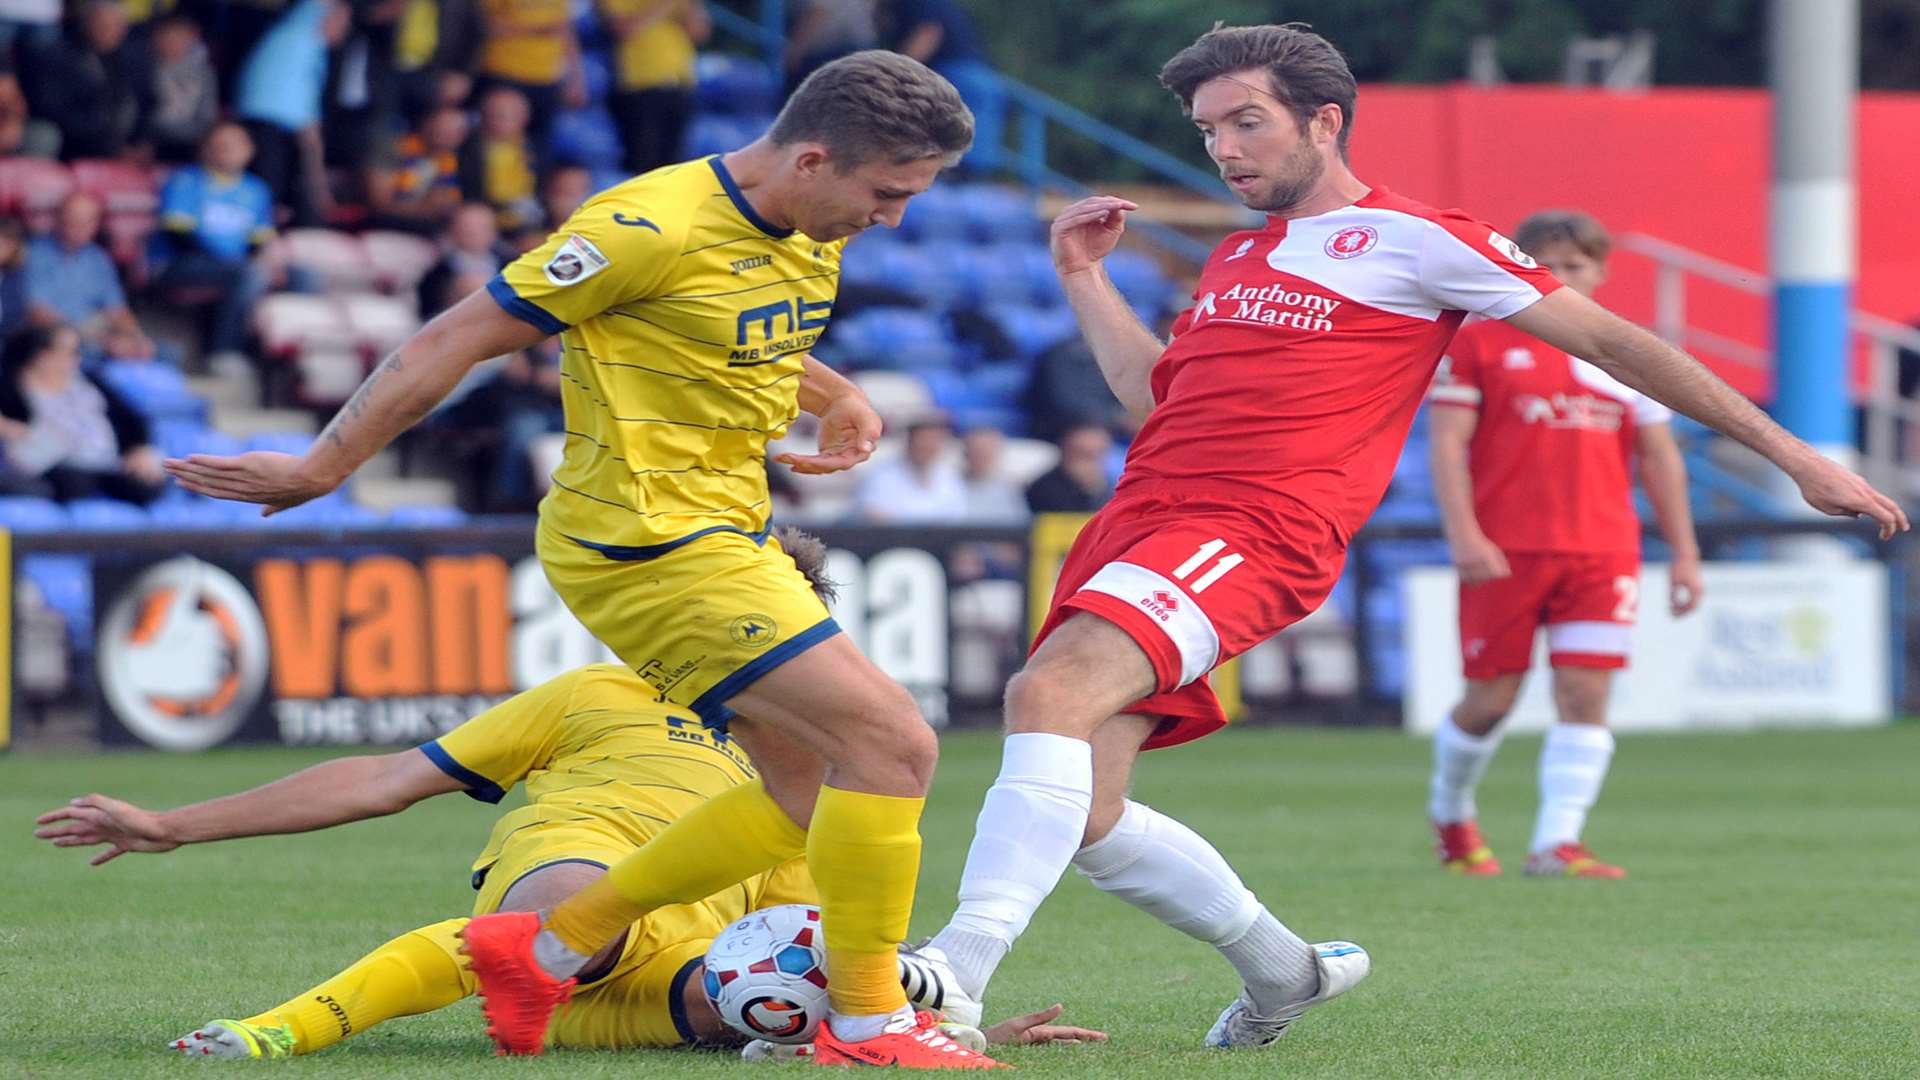 Welling's Ricky Wellard in action against Torquay. Picture: David Brown